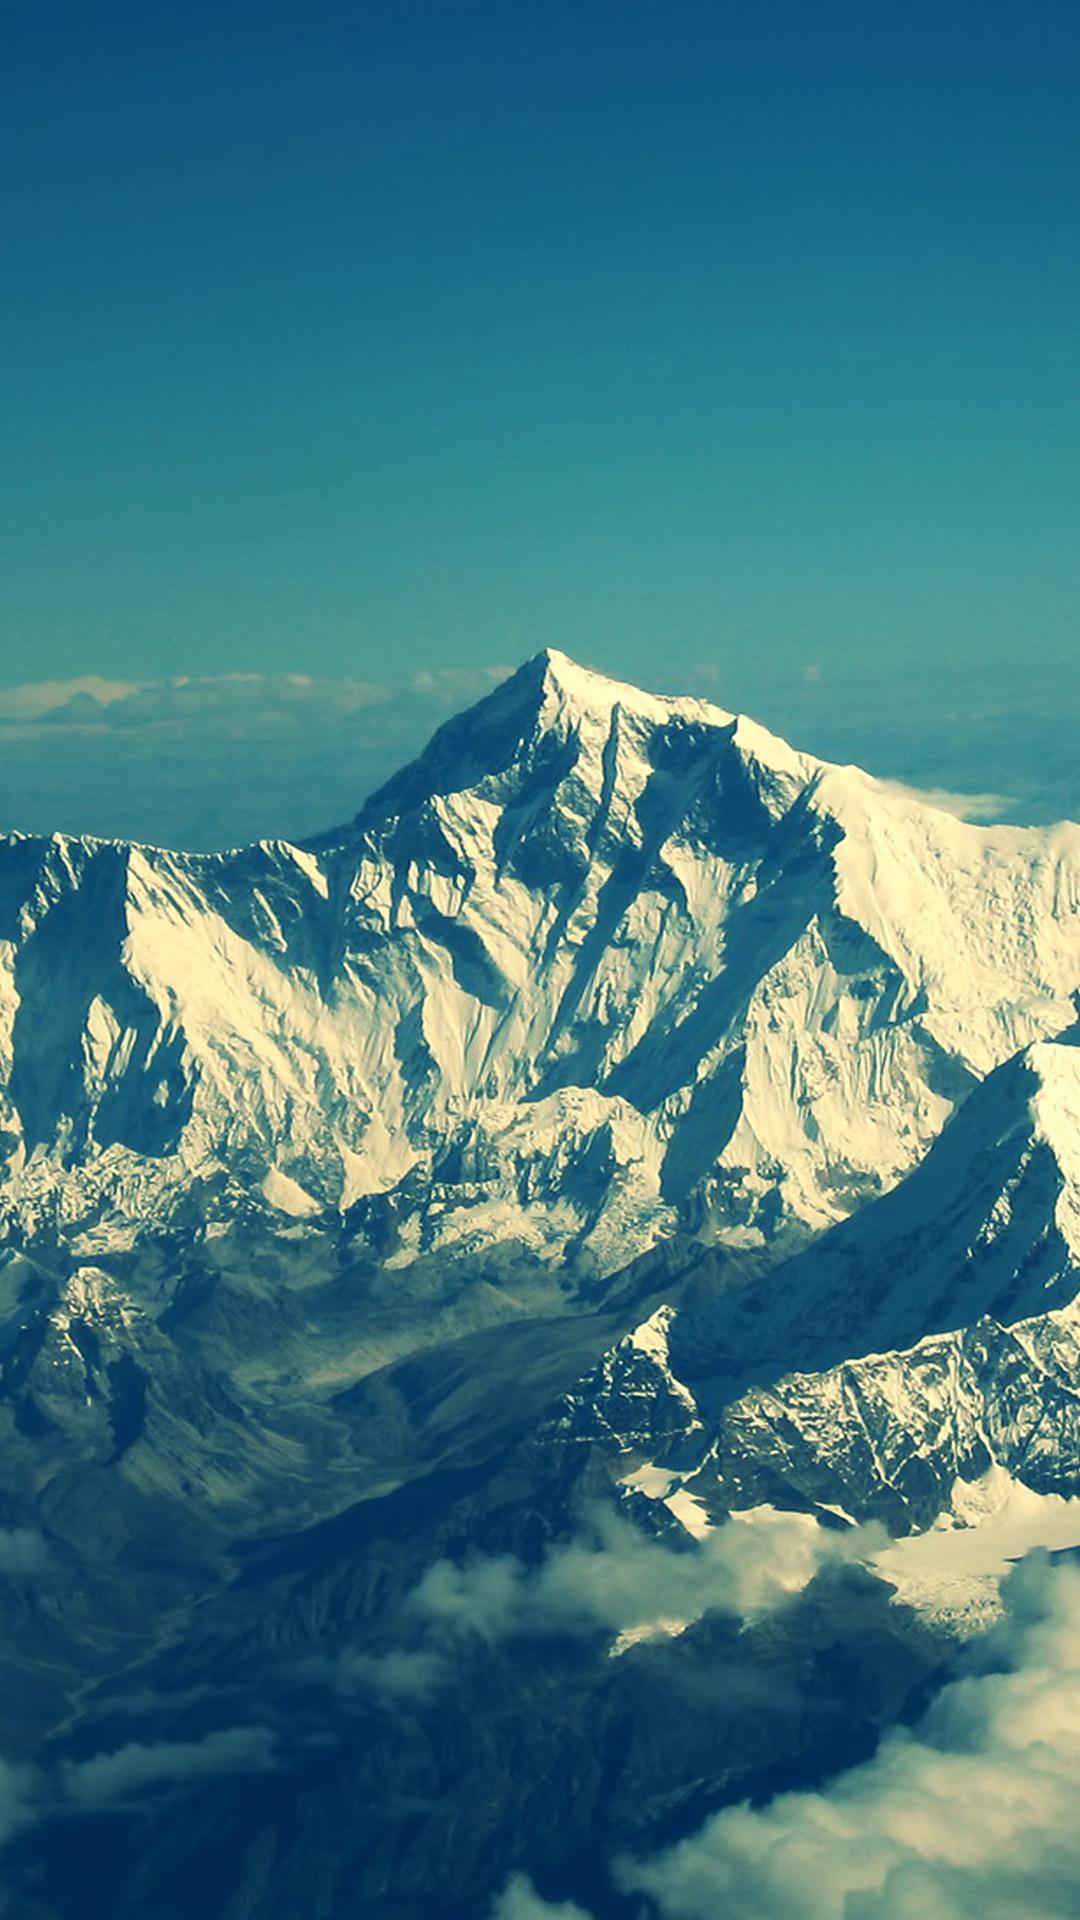 Ice mountainK wallpaper, free and easy to download